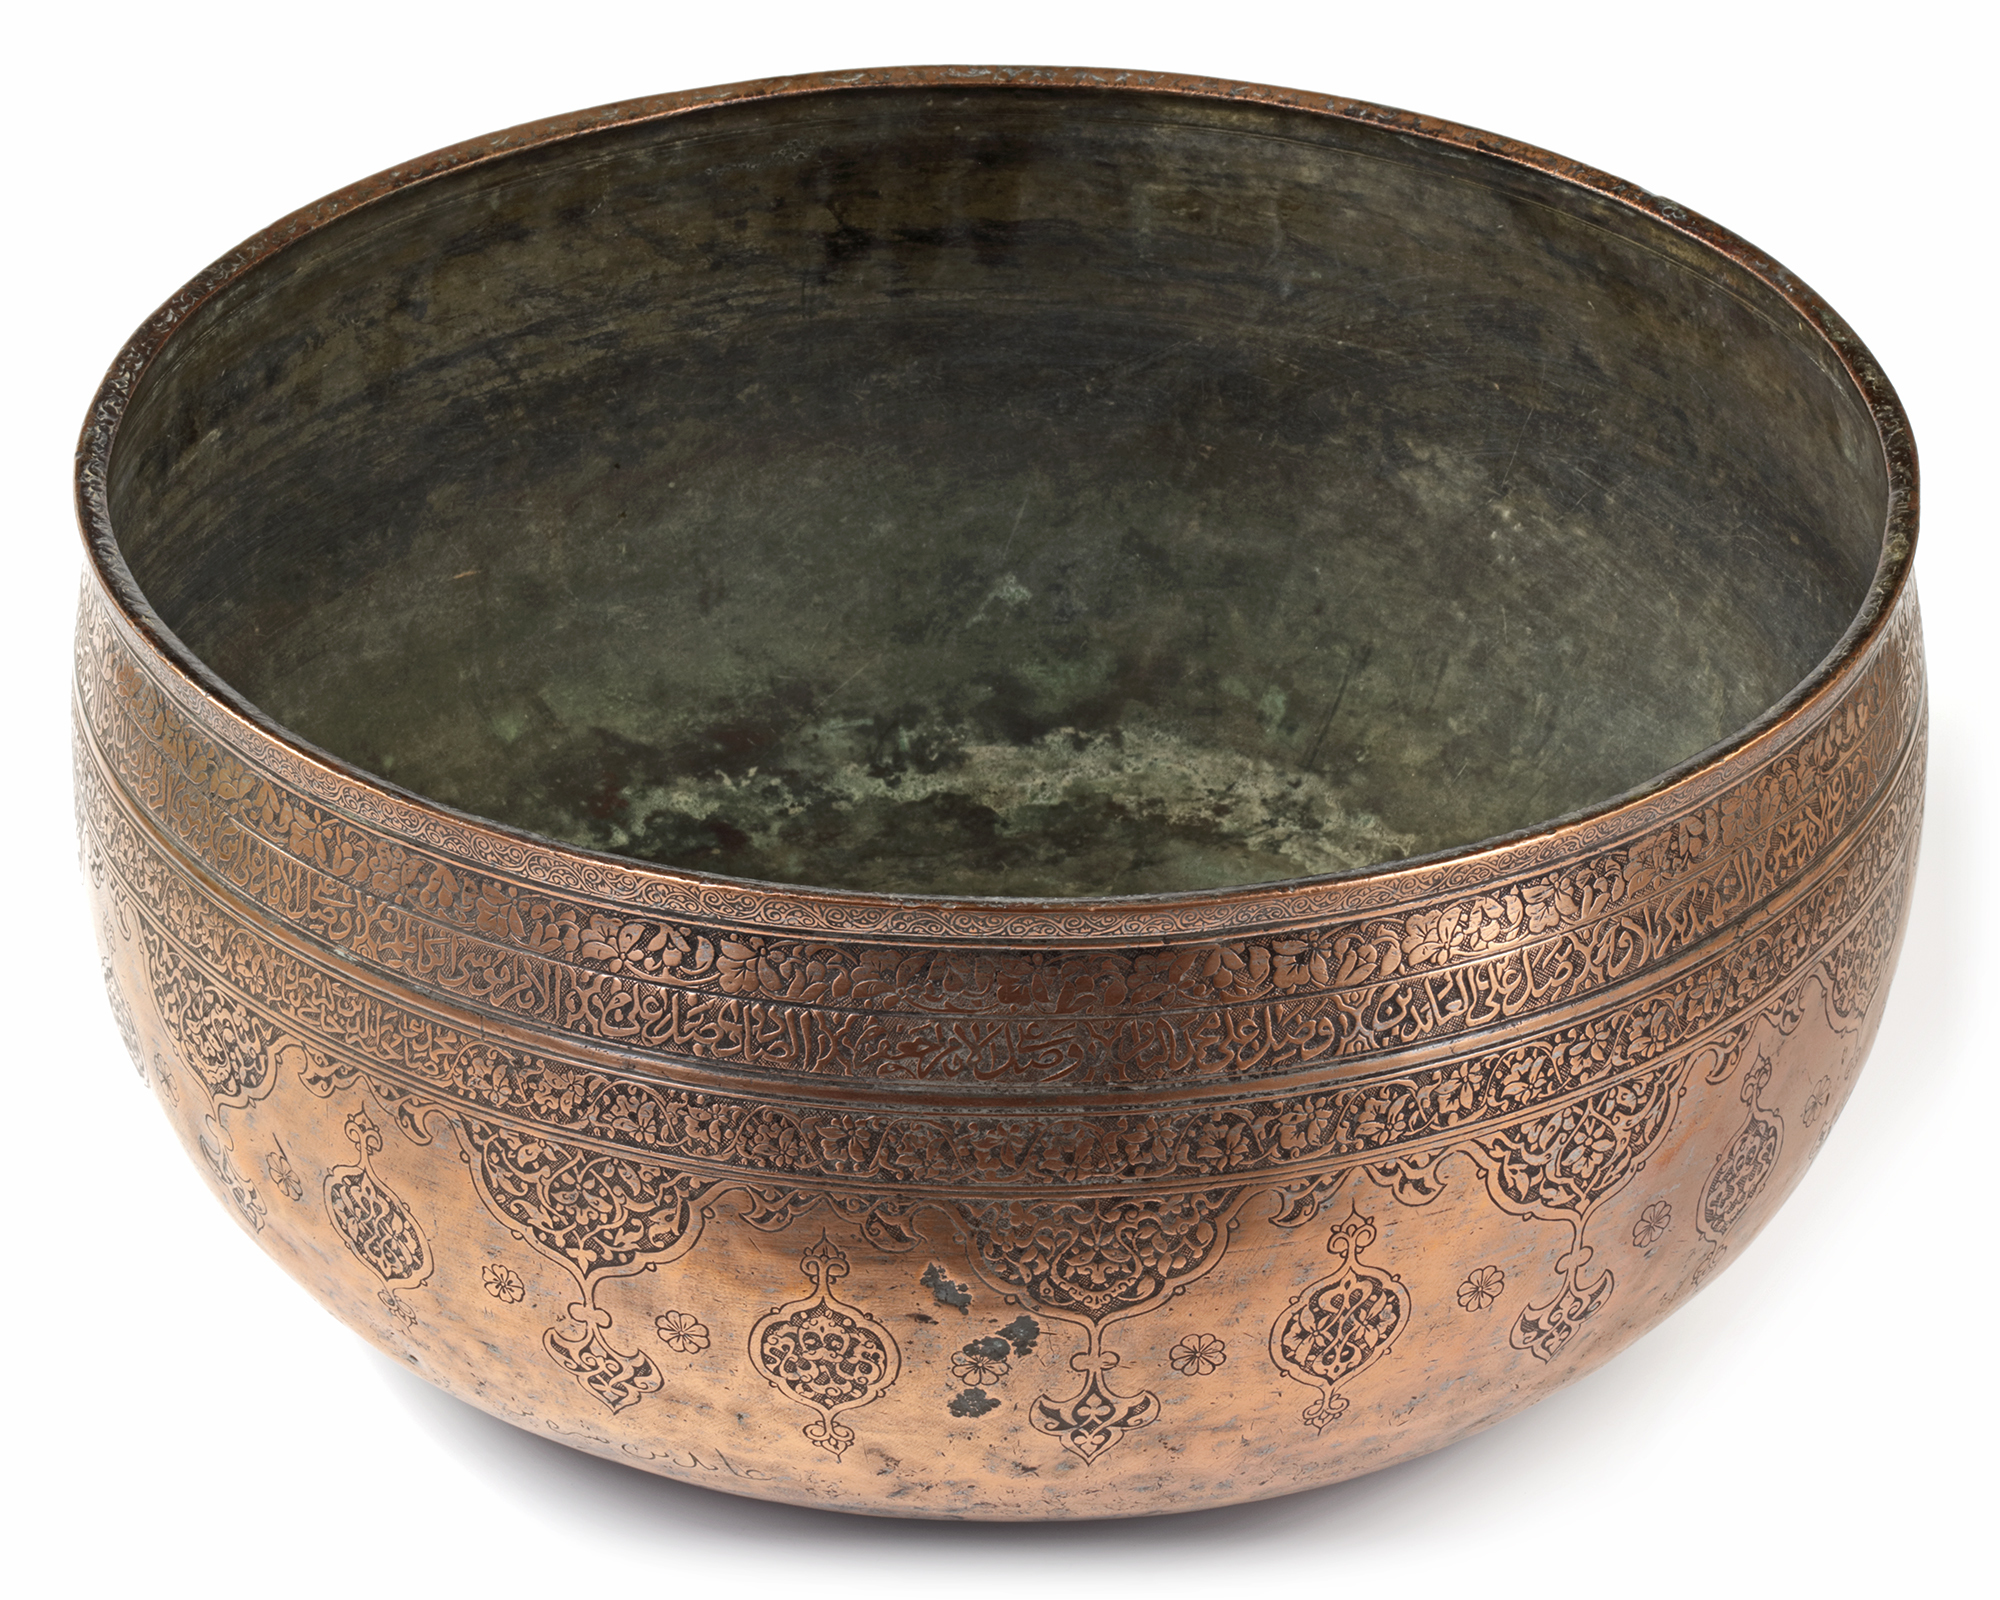 A MONUMENTAL LATE TIMURID ENGRAVED COPPER BOWL, CENTRAL ASIA, LATE